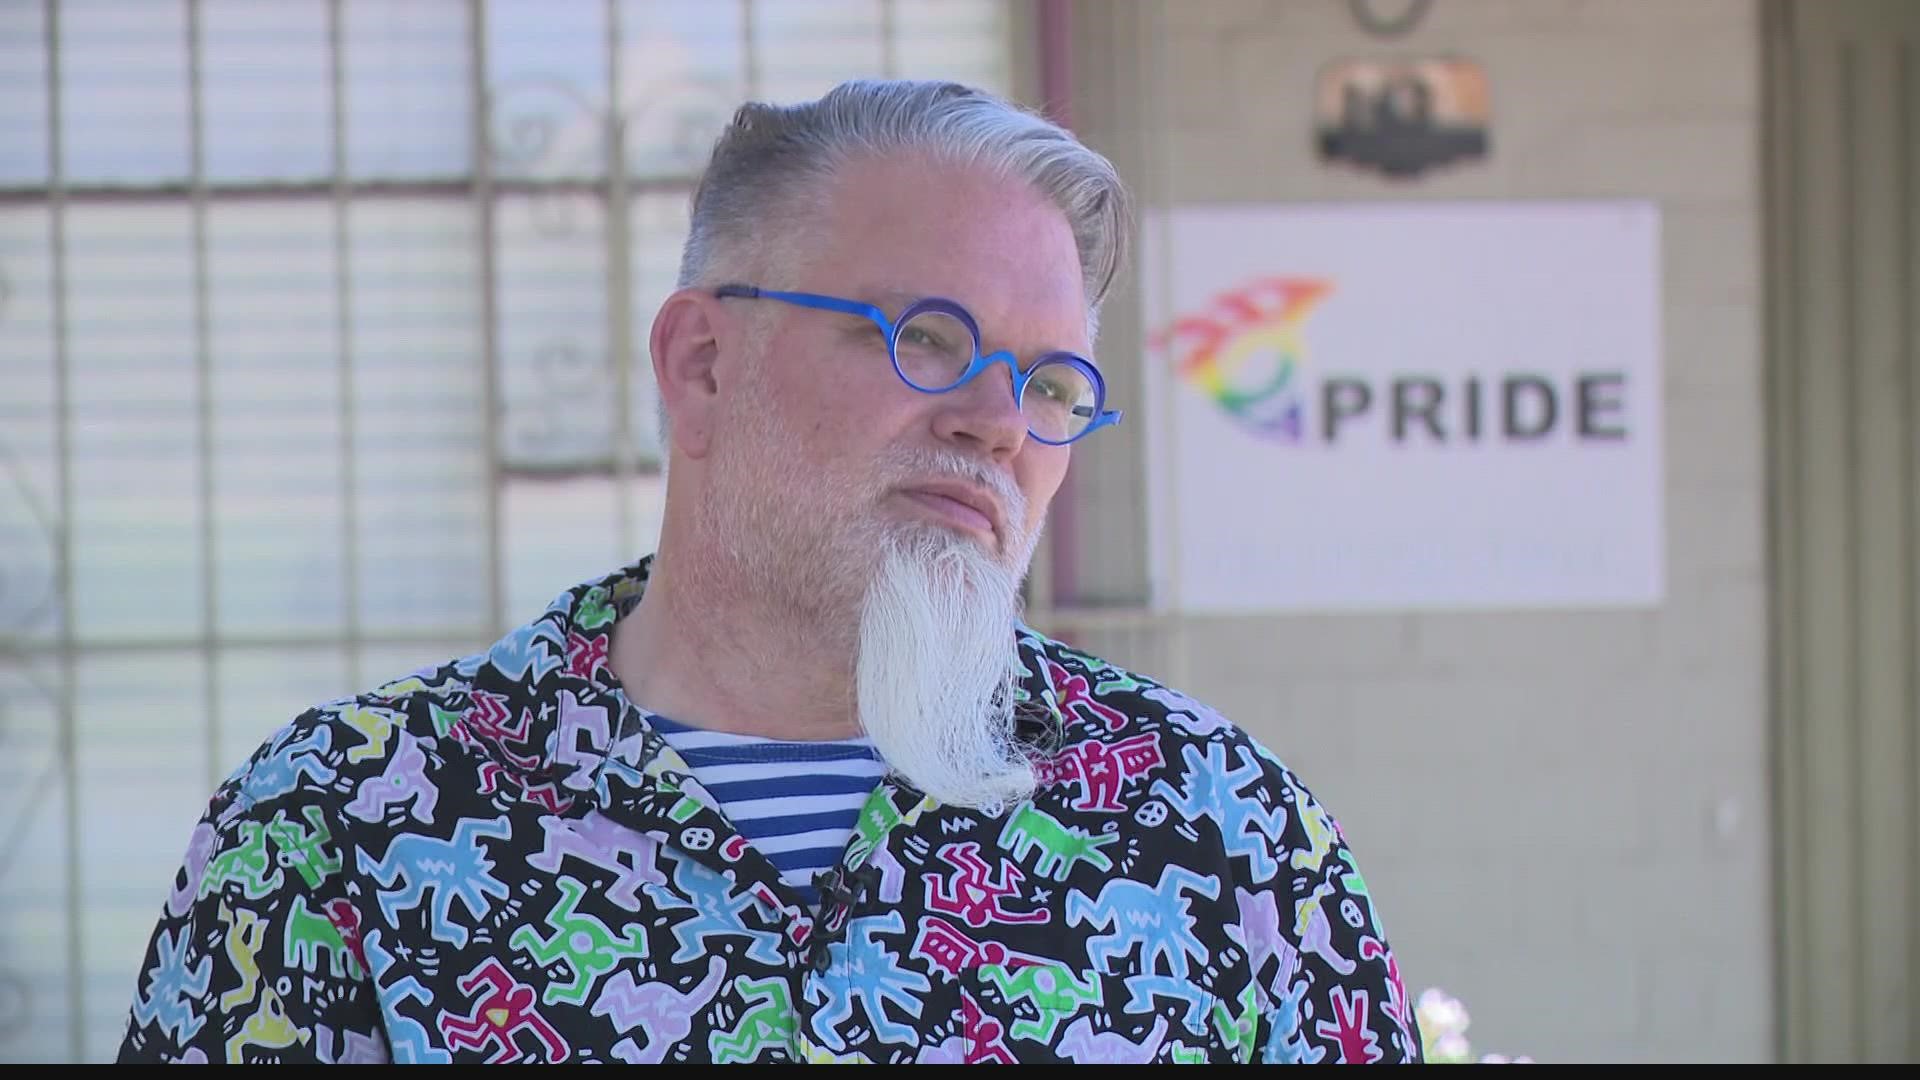 Arizona's "Hip Historian" is making strieds in preserving the state's LGBTQ+ history. During Pride Month he's honoring the trailblazers who made moves in Arizona.